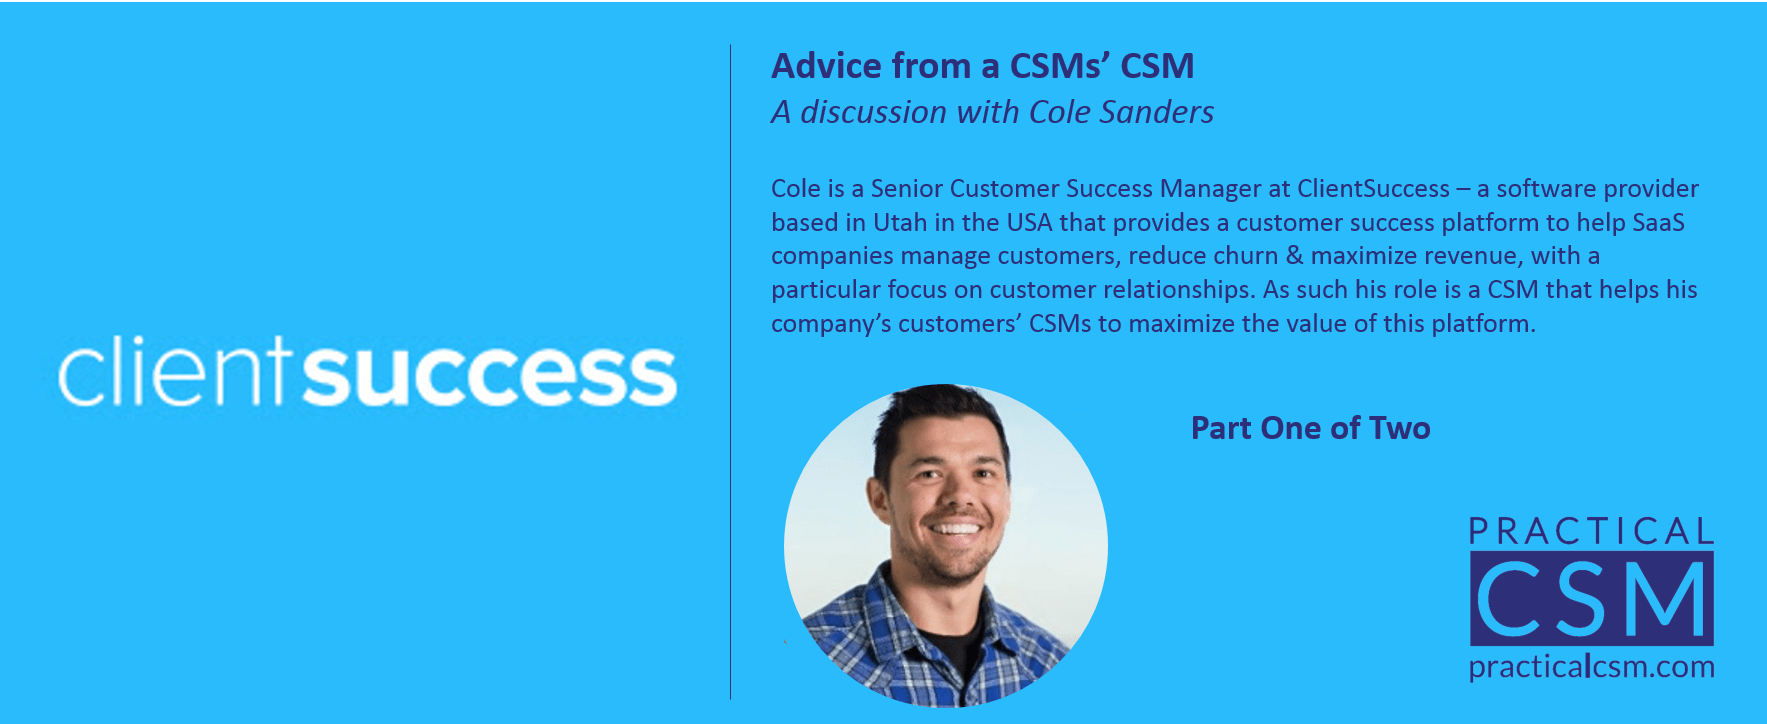 Practical CSM Advice from a CSMs' CSM with Cole Sanders part 1